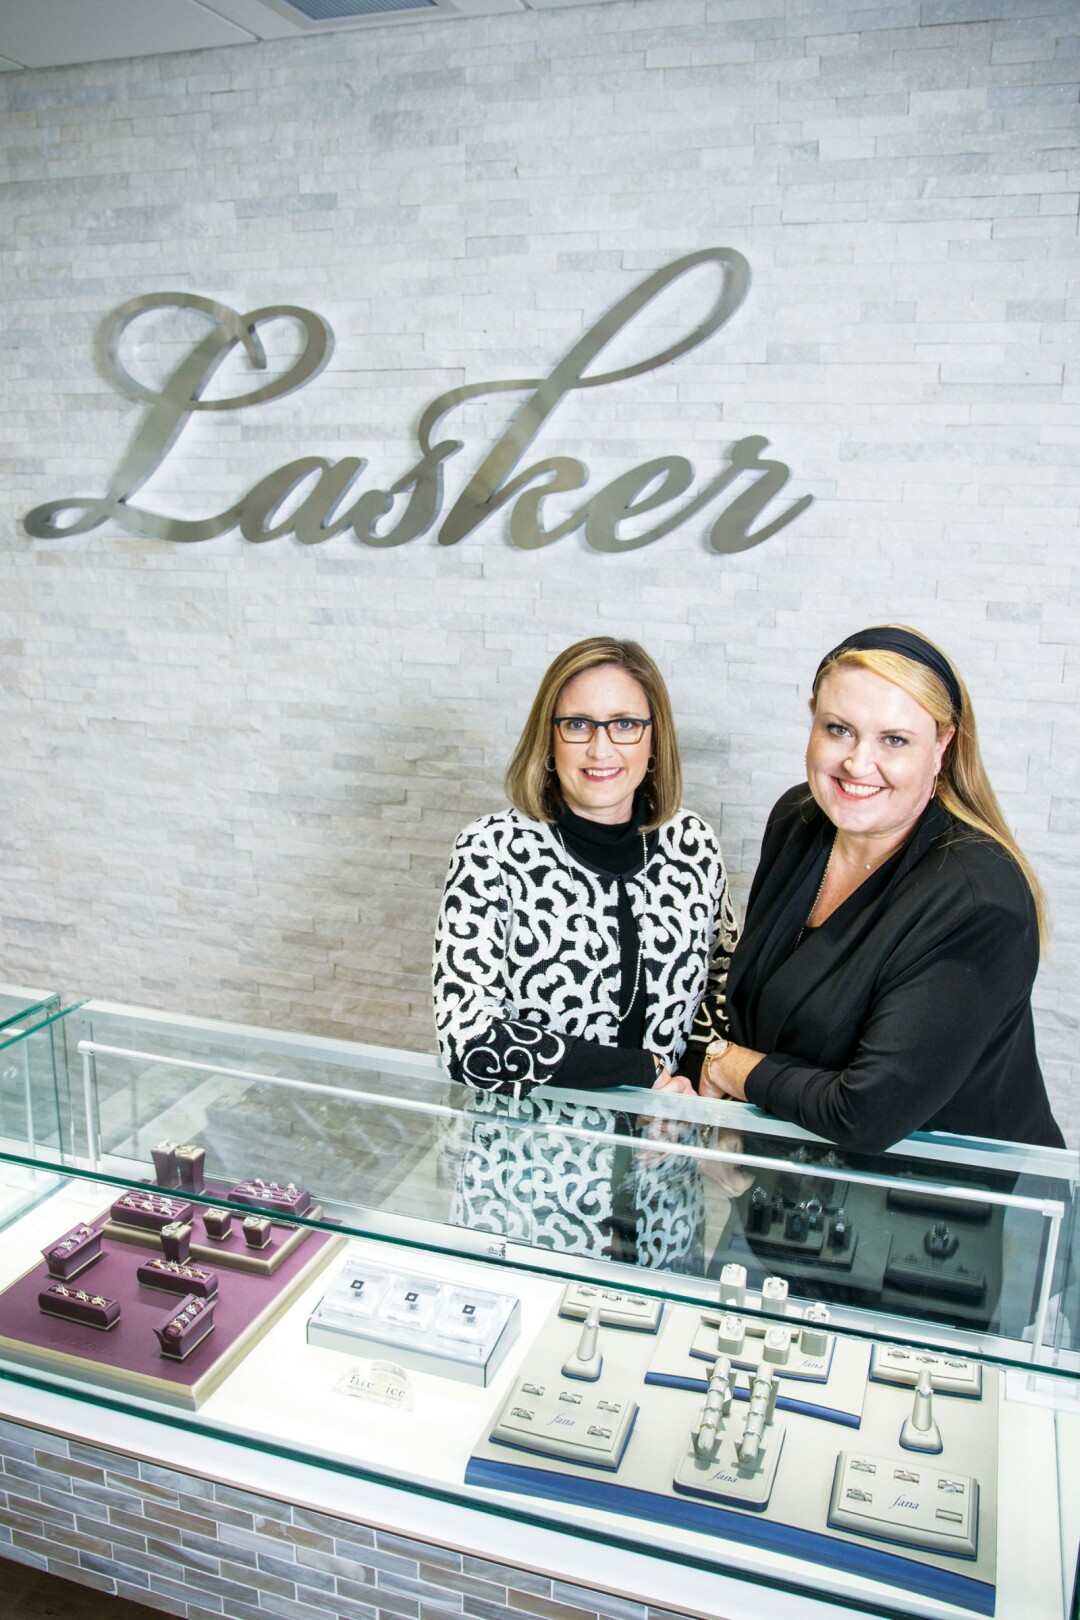 SPARKLING MEMORIES. Sisters Liz and Nicole Lasker head up Lasker Jewelers, selling some of the finest jewelry in the Valley, and giving back to the community.